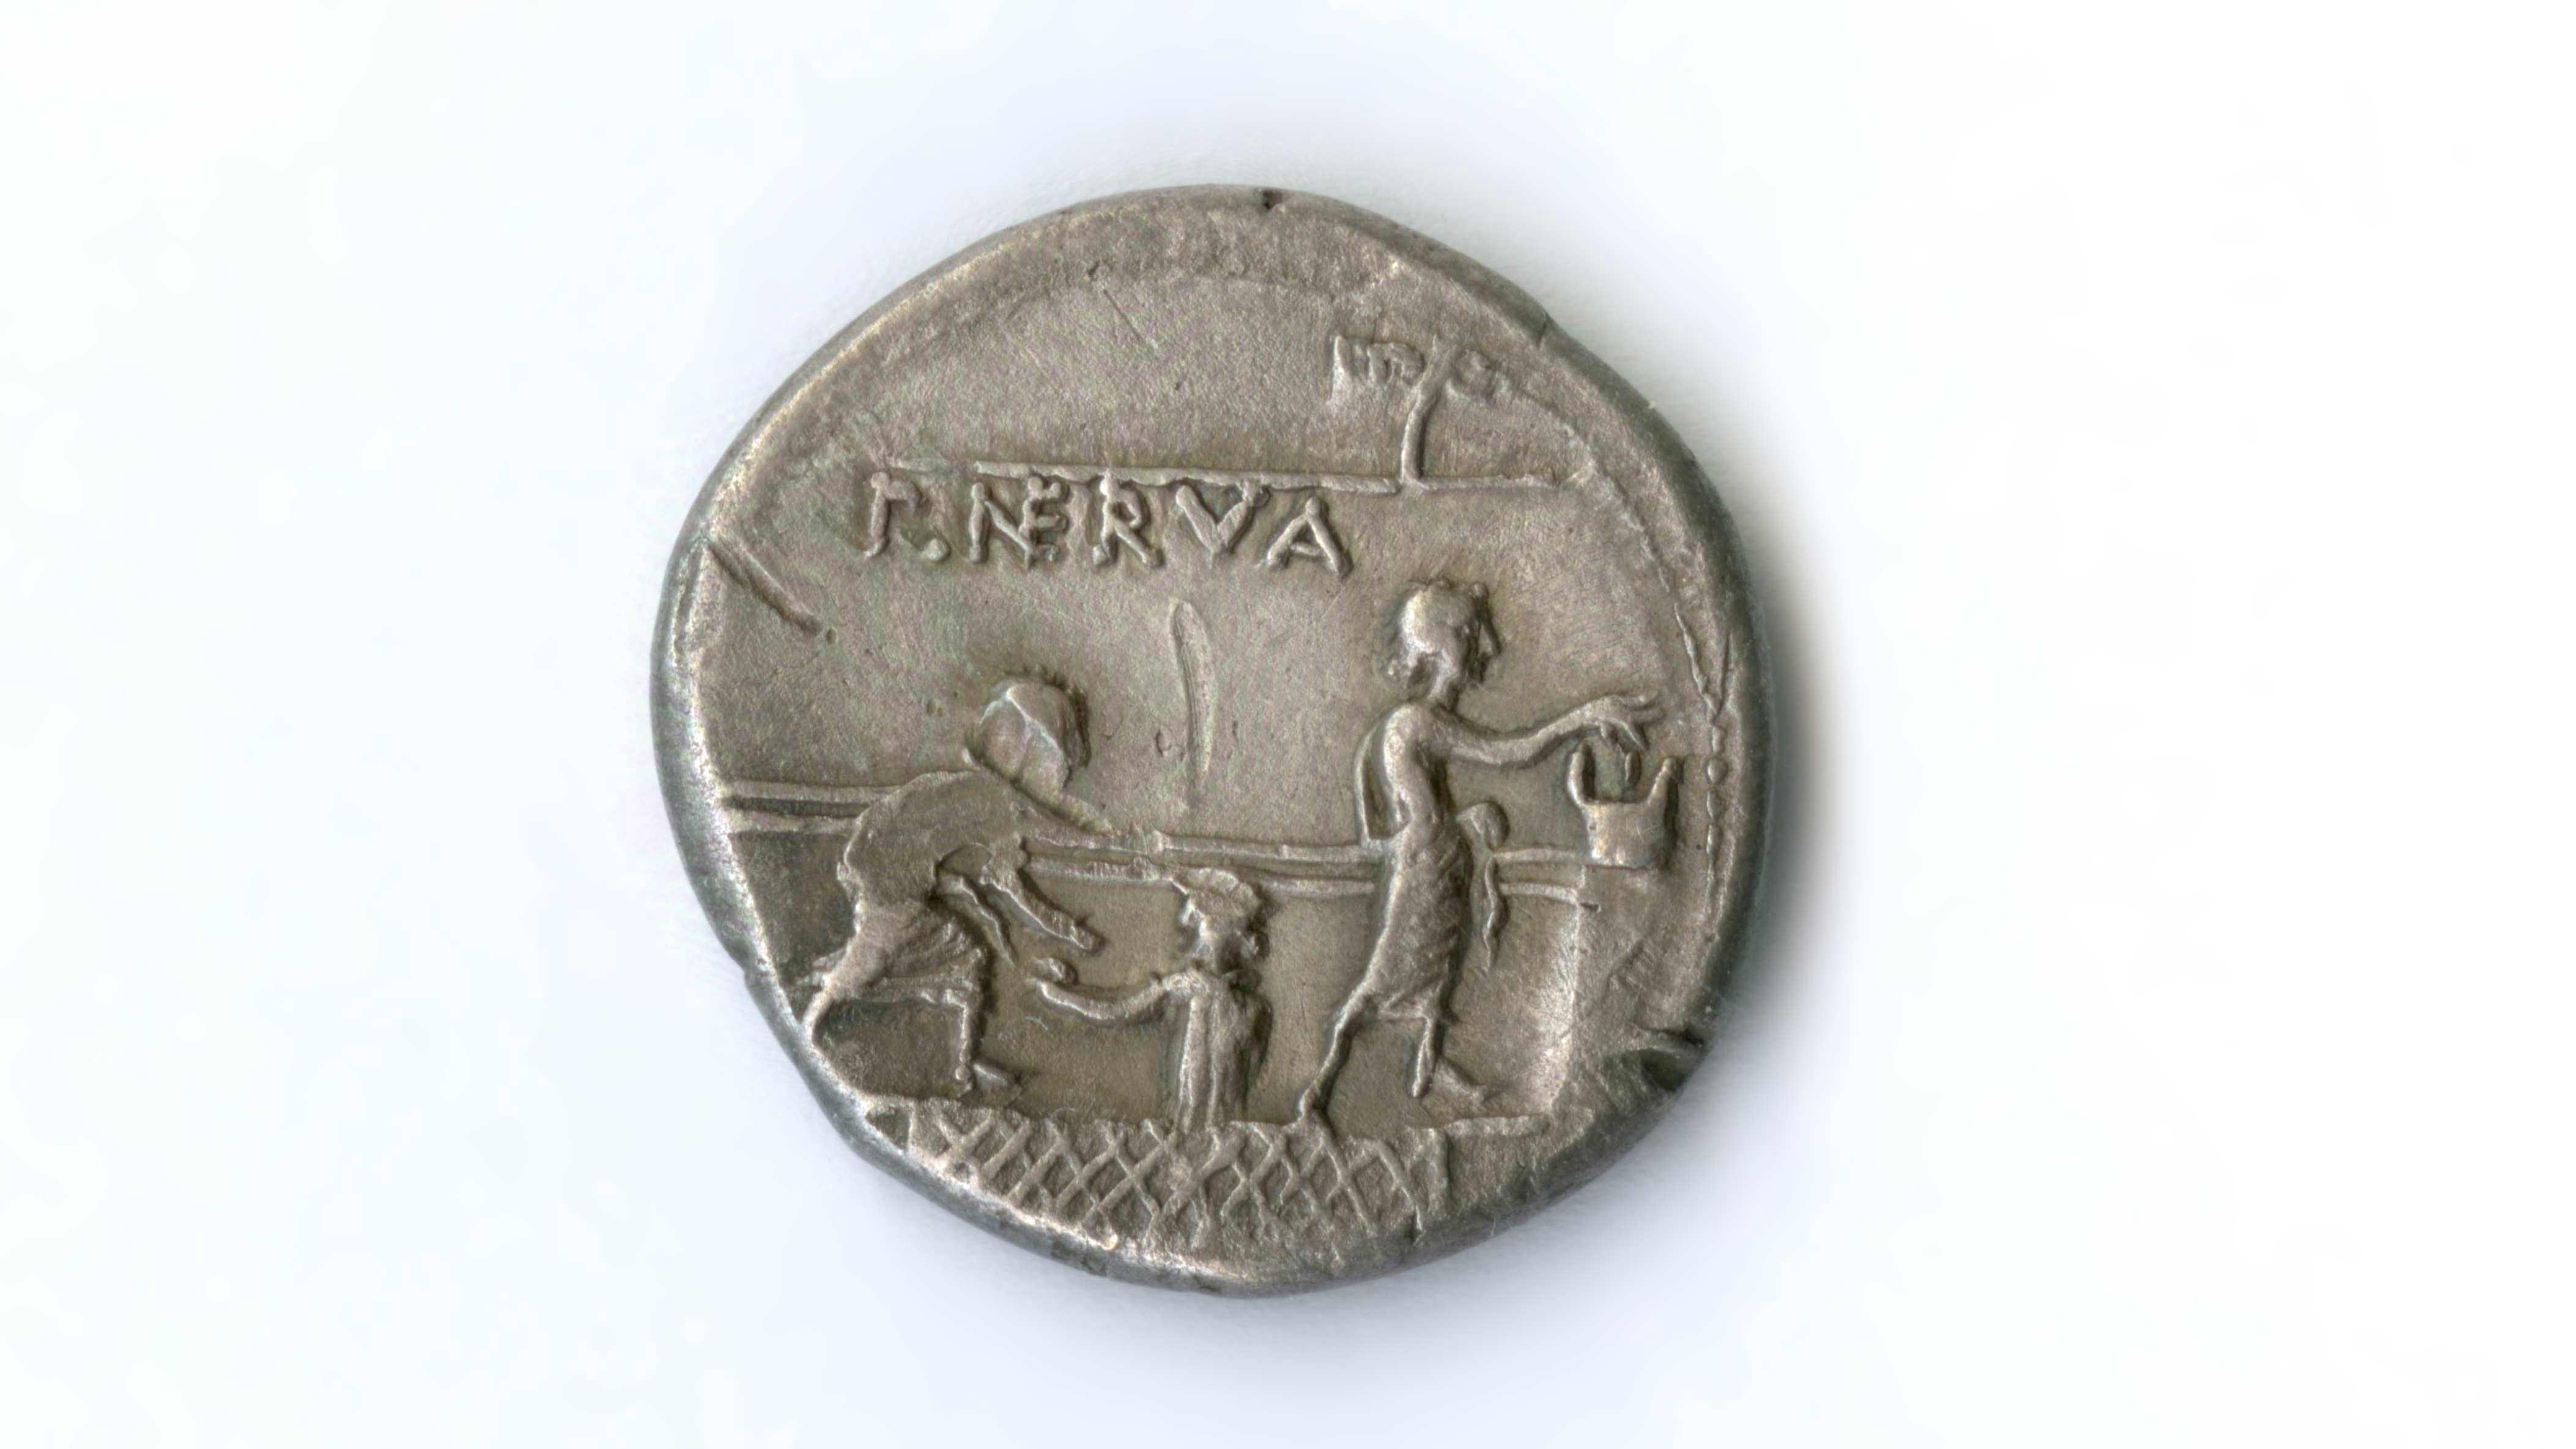 ancient coin with design featuring P. NERVA text and figures placing ballots